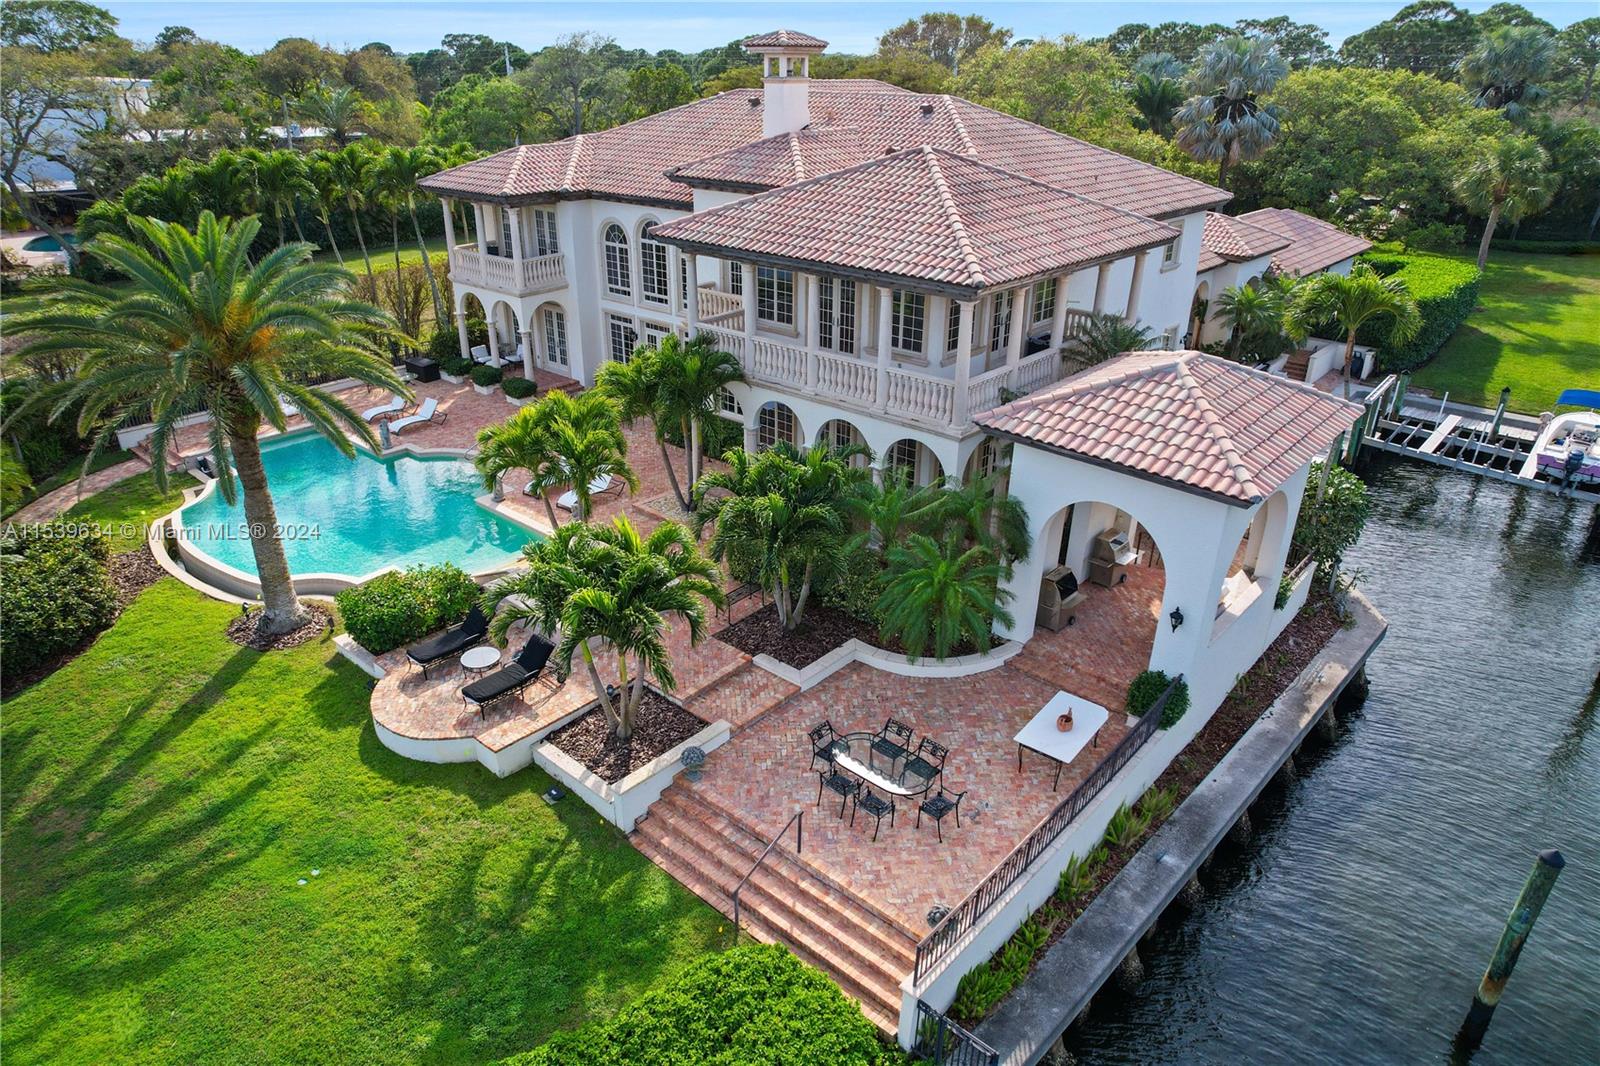 This real estate offering presents an exceptional opportunity to own a waterfront estate with over 2 acres of land and 300 feet of direct Intracoastal waterfront. With 4 parcels included, there is potential for expansion and customization. The private yacht basin provides ample space for your yacht and other personal watercraft with convenient access to the Atlantic. The residence features 4 bedrooms, 4.5 bathrooms and expansive living spaces designed for indoor-outdoor living. The gourmet kitchen, renovated in 2023, is equipped with top-of -the line appliances, quartzite counters, custom cabinetry, and 2 spacious islands. Conveniently located to fine dining, cultural attractions, world class golf, and other recreational activities.